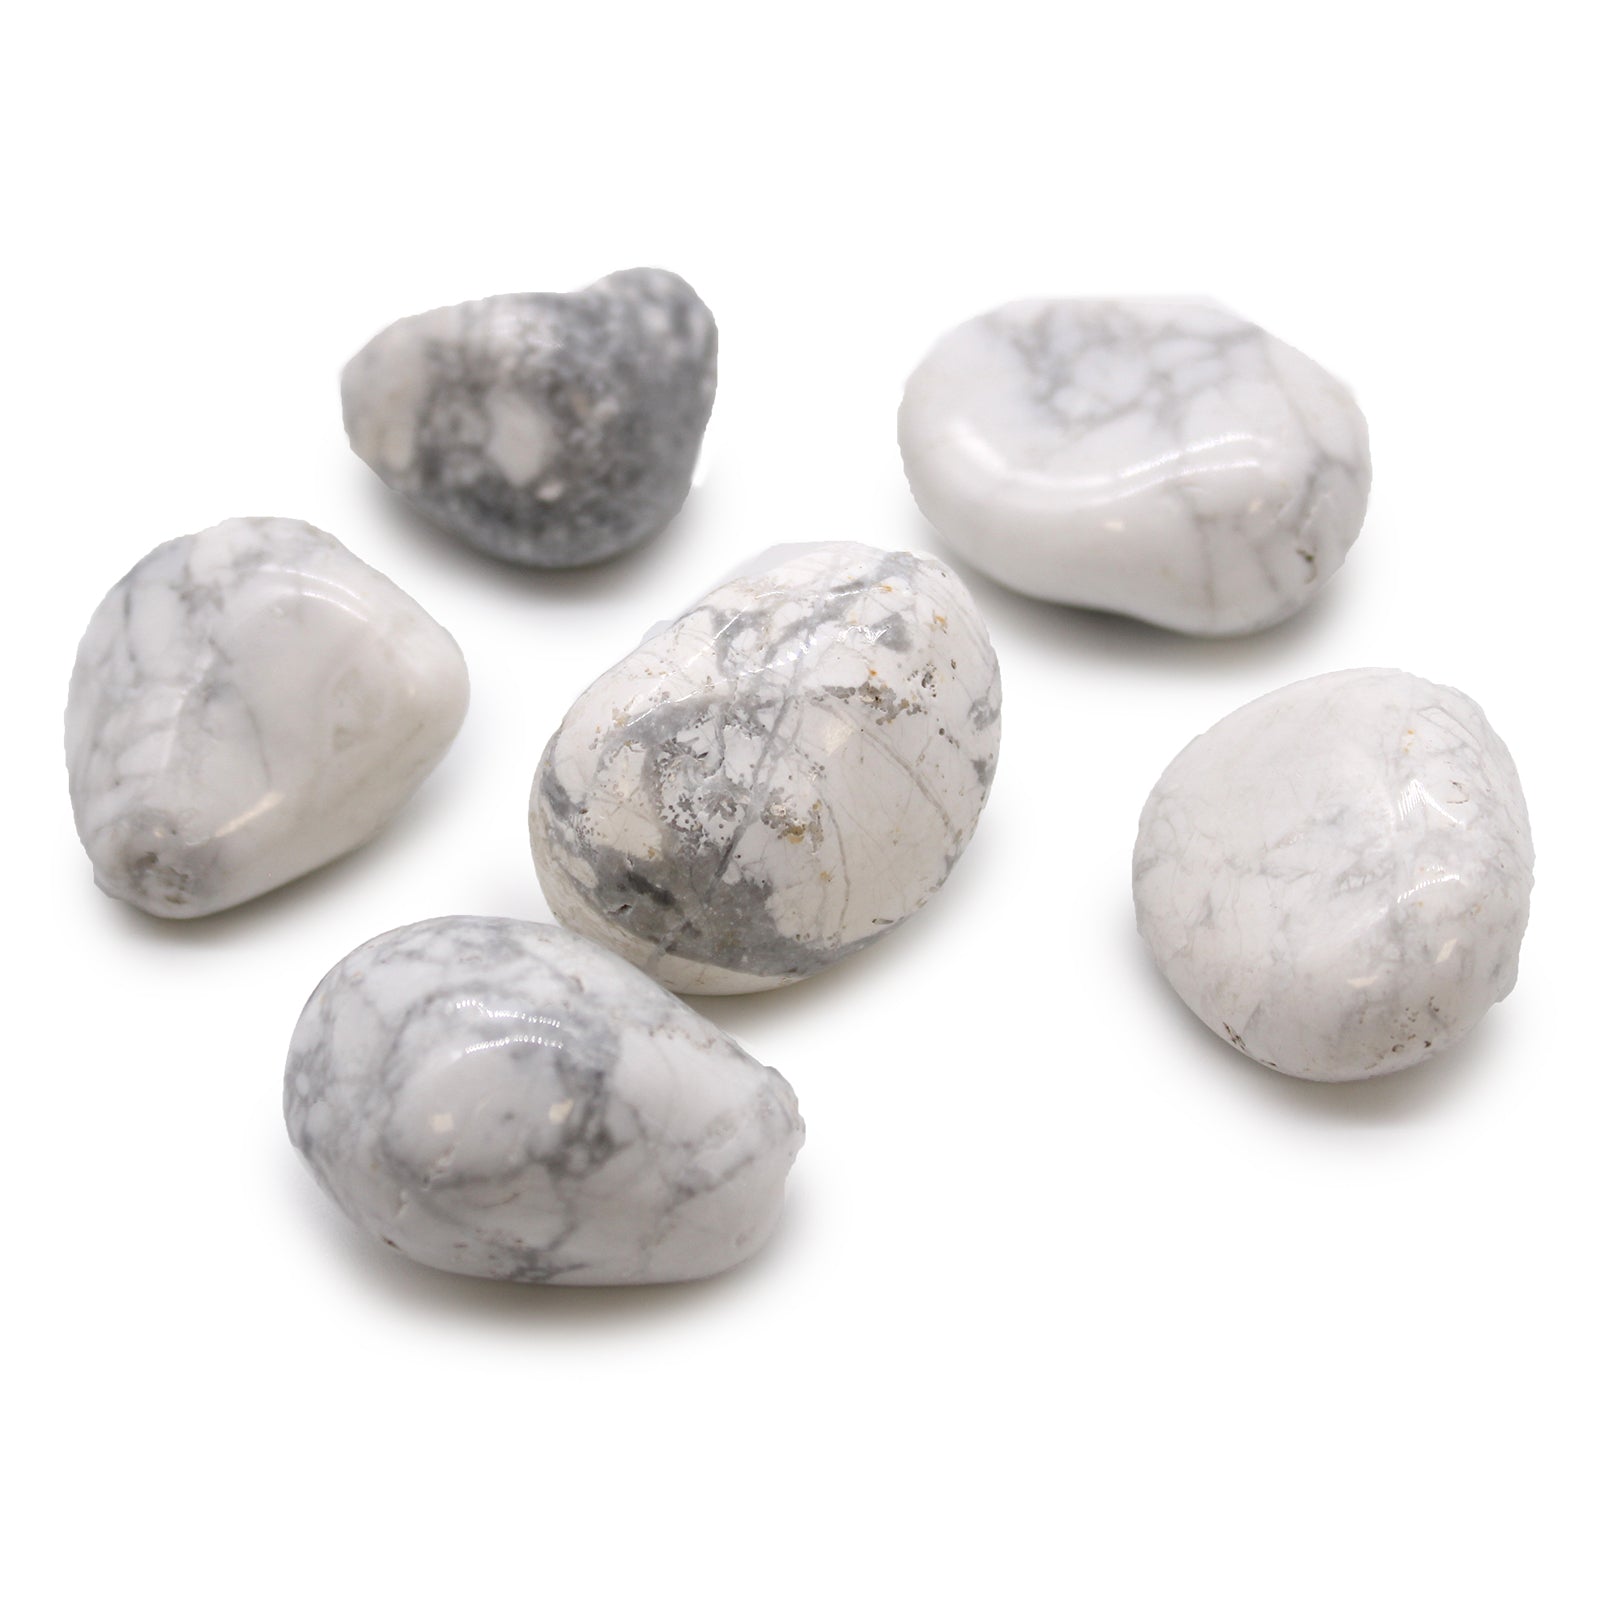 View Large African Tumble Stones White Howlite Magnesite information